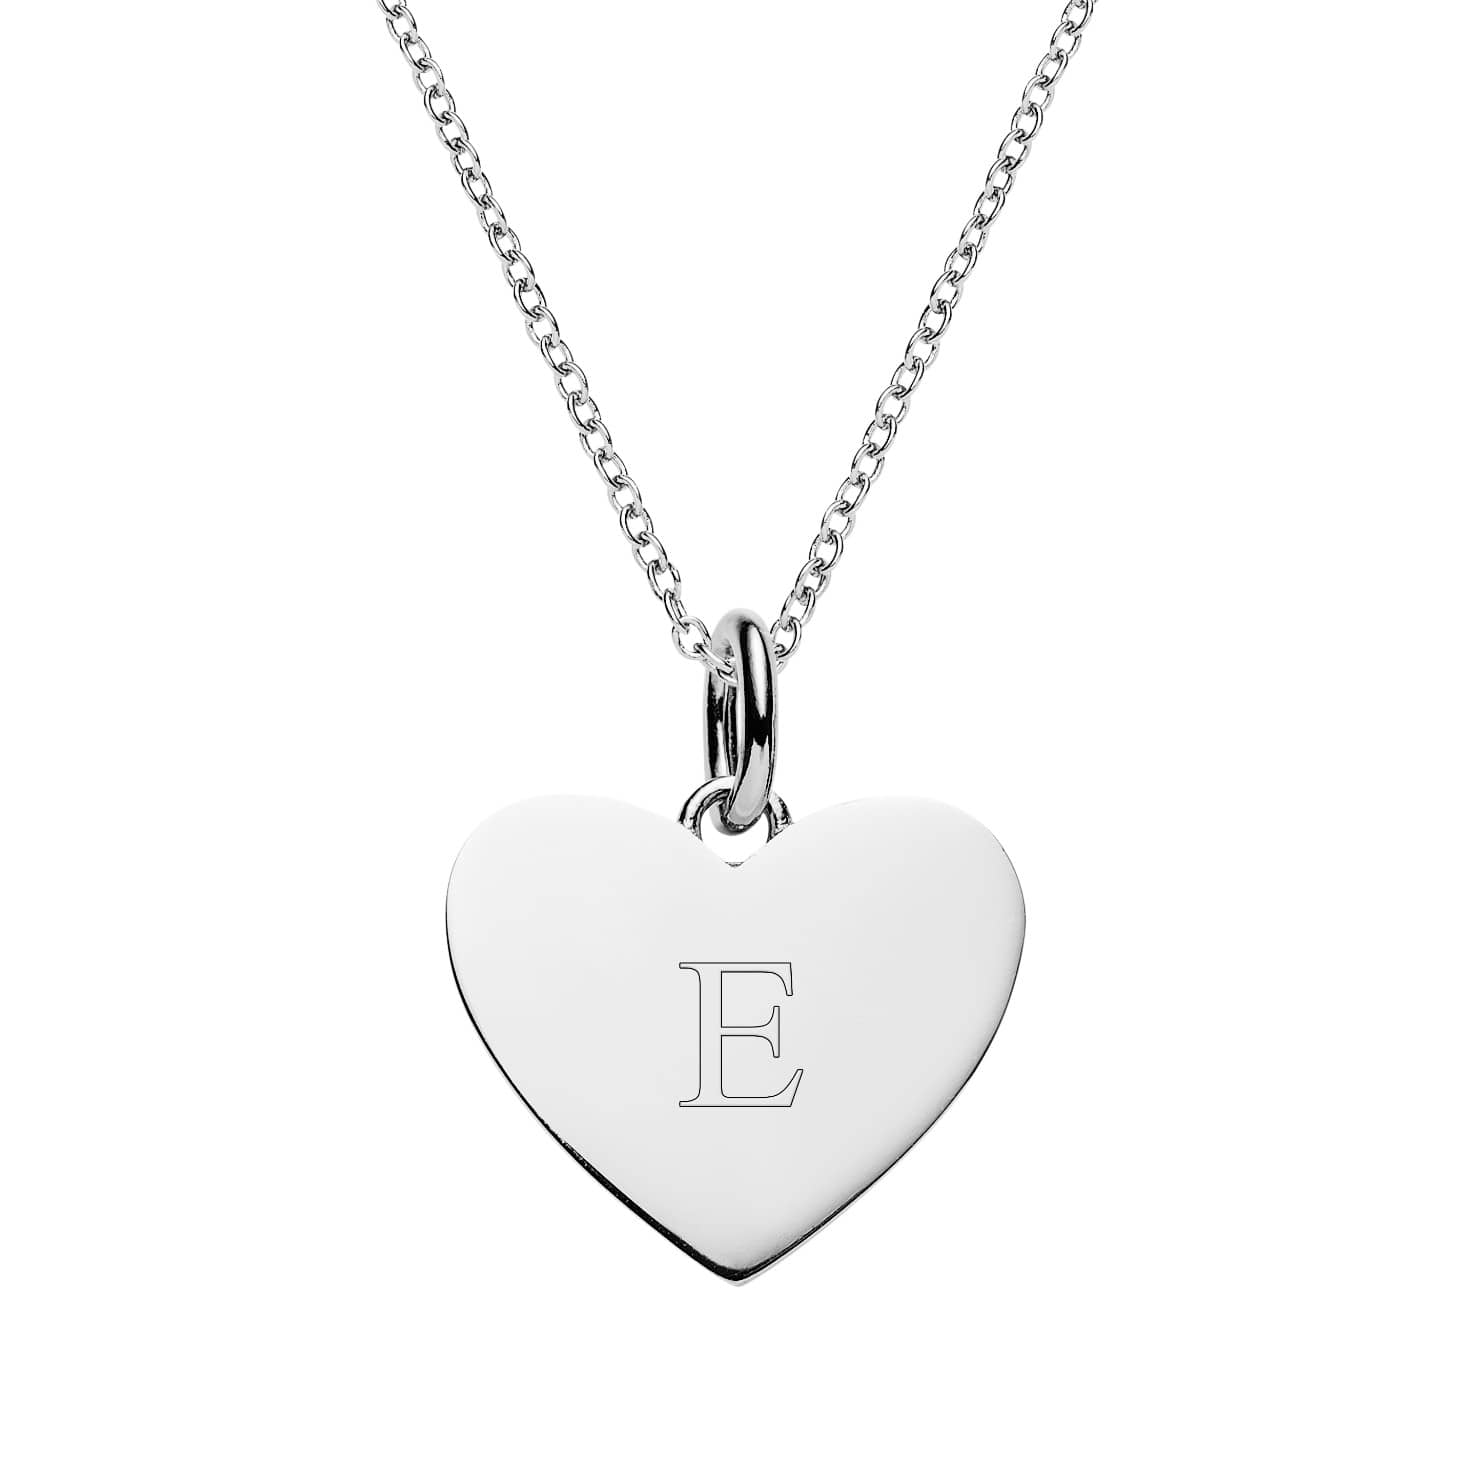 Name necklace, heart shaped silver pendant – Tracy Anne Jewellery